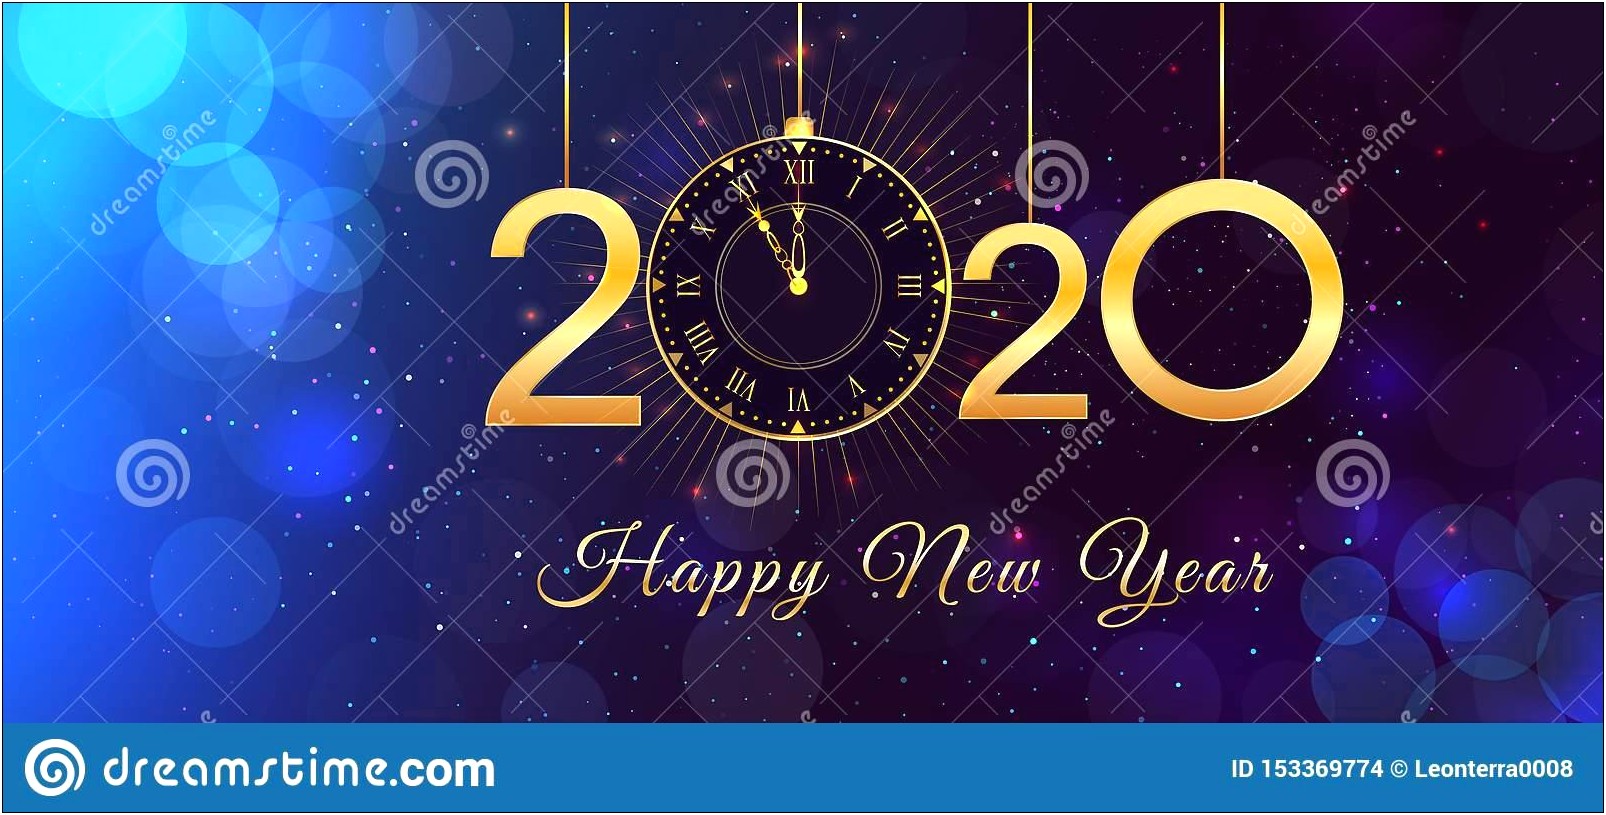 Happy New Year 2020 Template Free